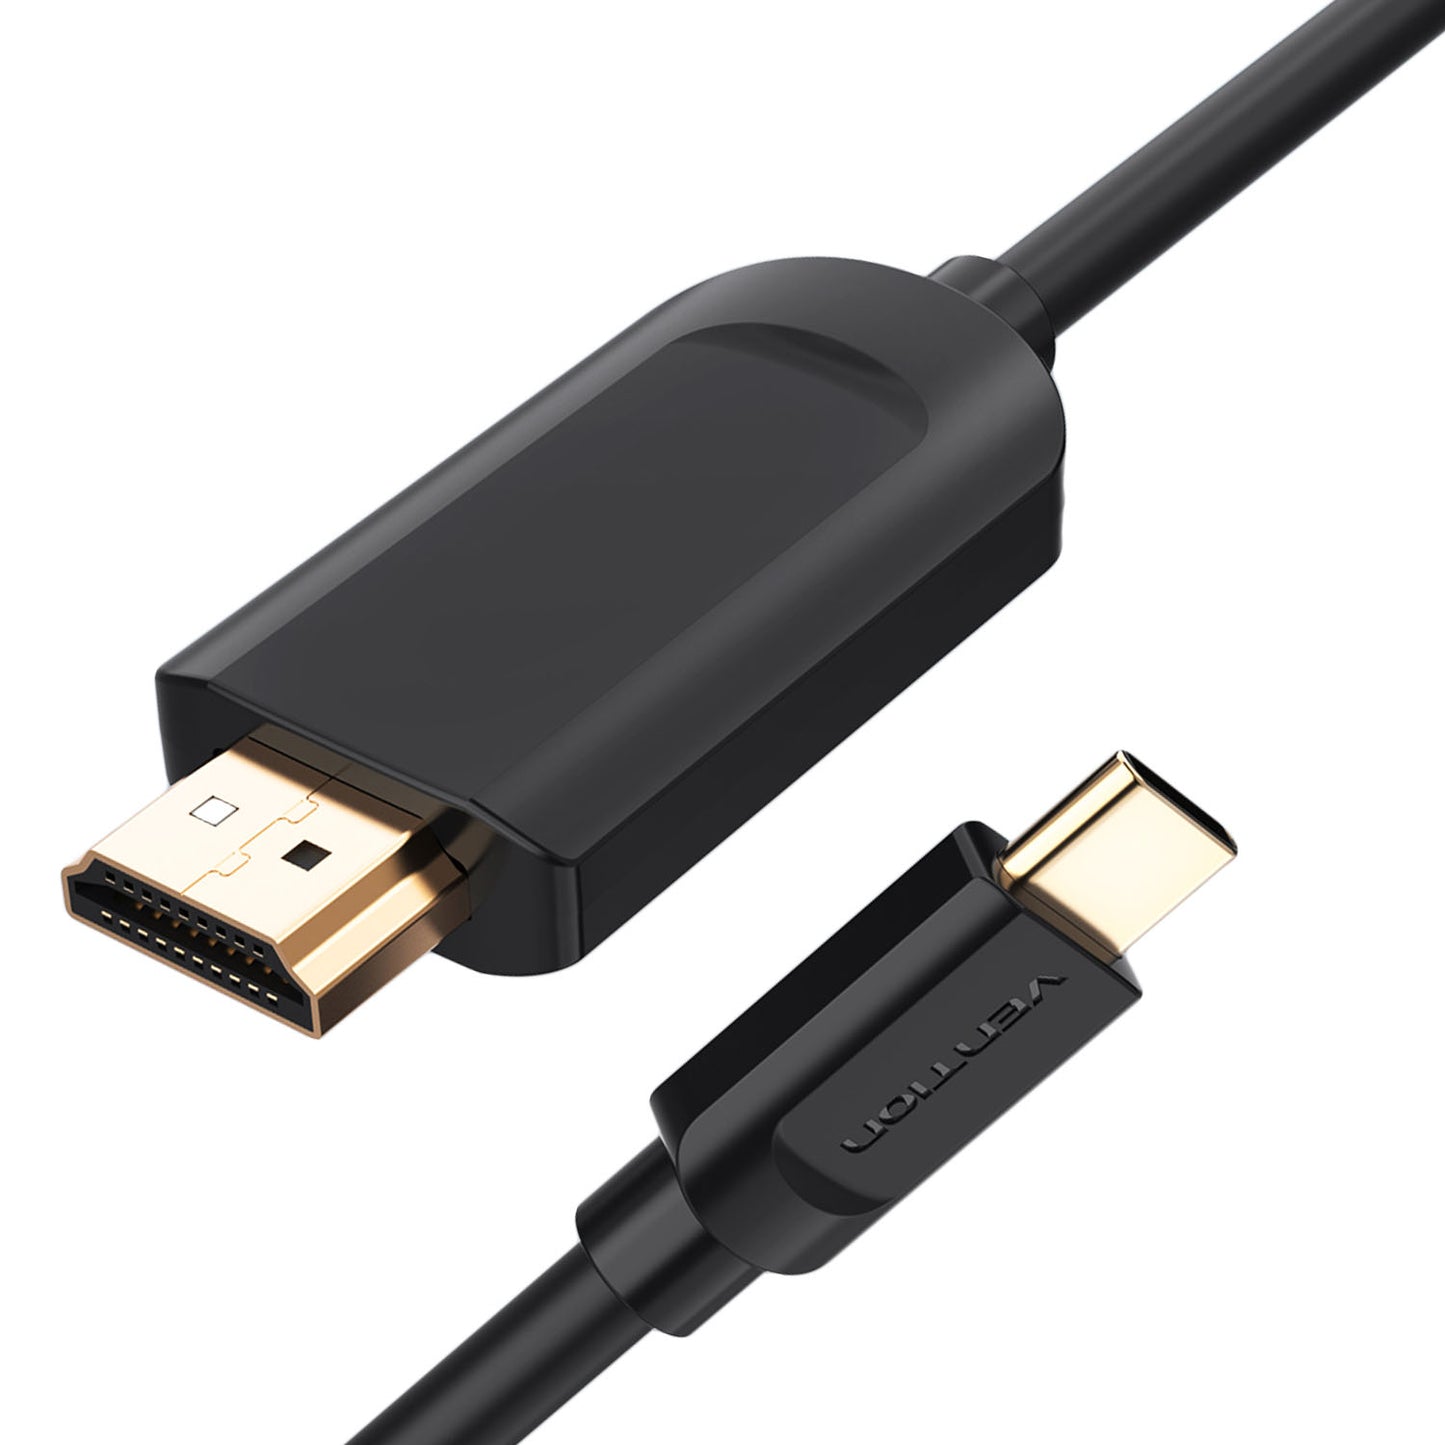 Vention USB Type-C to HDMI 1.4 Adapter 4K/30Hz Driver-Free HD Video Cable with Triple Shielding LT8711HE Chip (Different Lengths Available) (CGU)